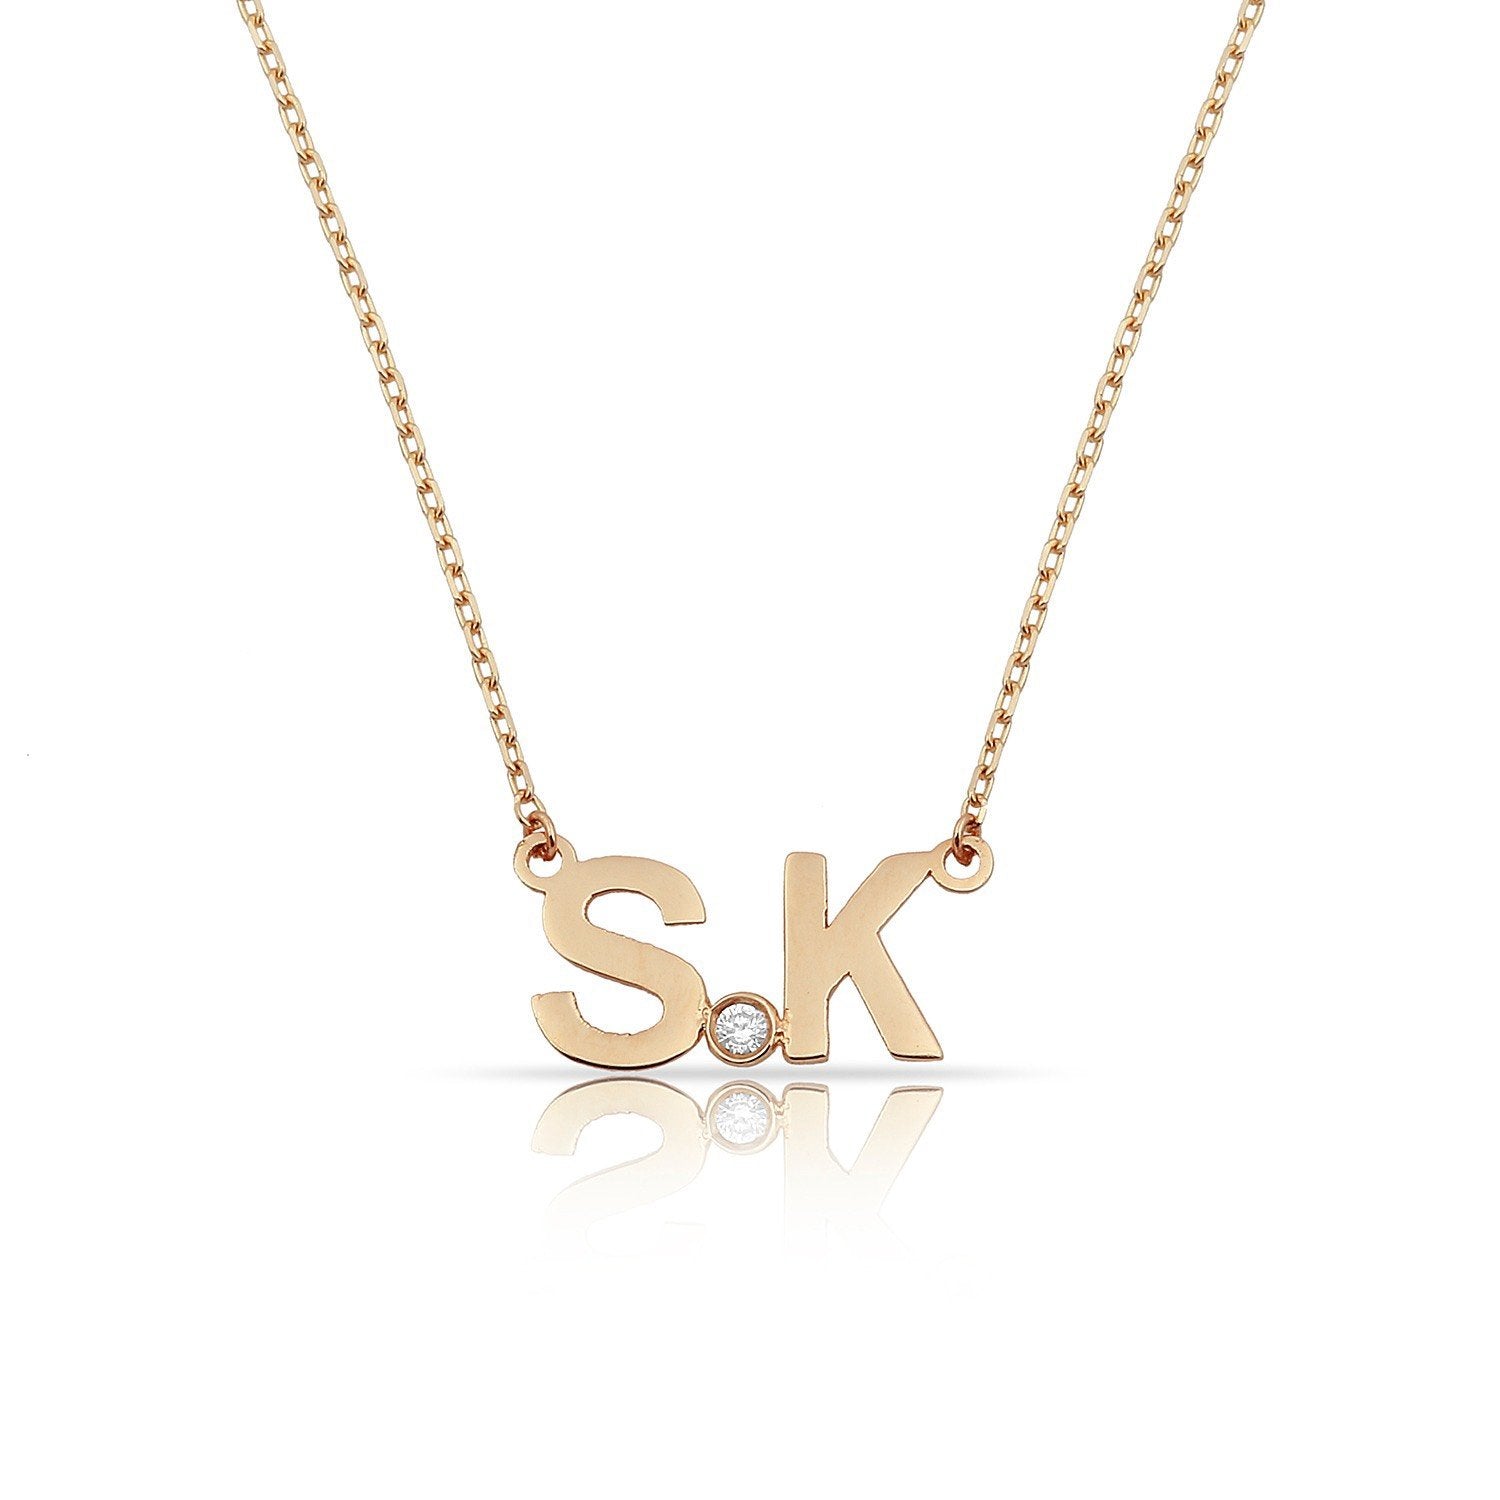 TSK Perfect Pair Initial Necklace JEWELRY The Sis Kiss 14k Gold with a single diamond